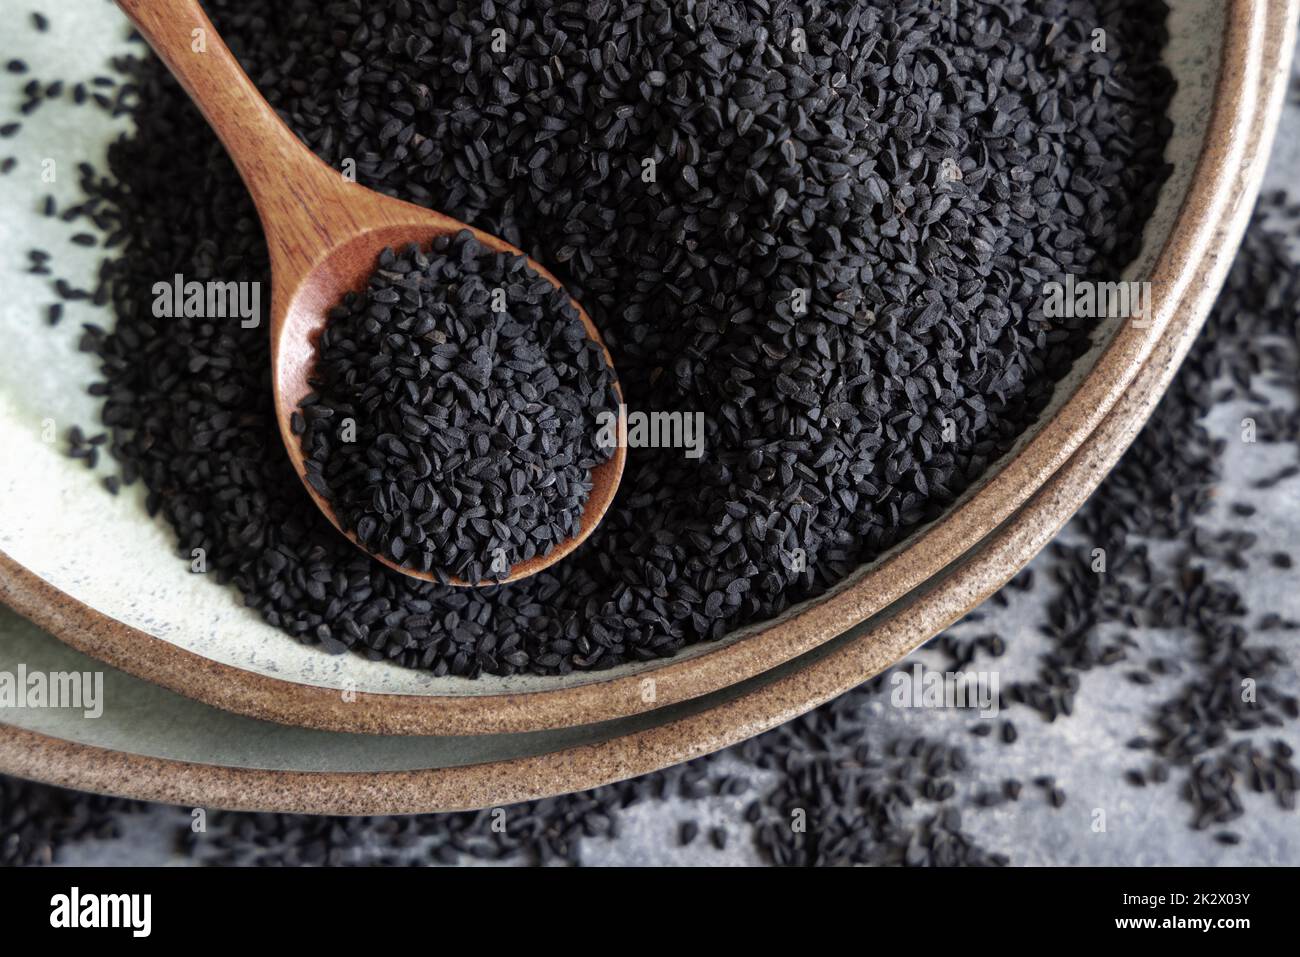 Plate of Indian spice Black cumin (nigella sativa or kalonji) seeds close up with a wooden spoon Stock Photo